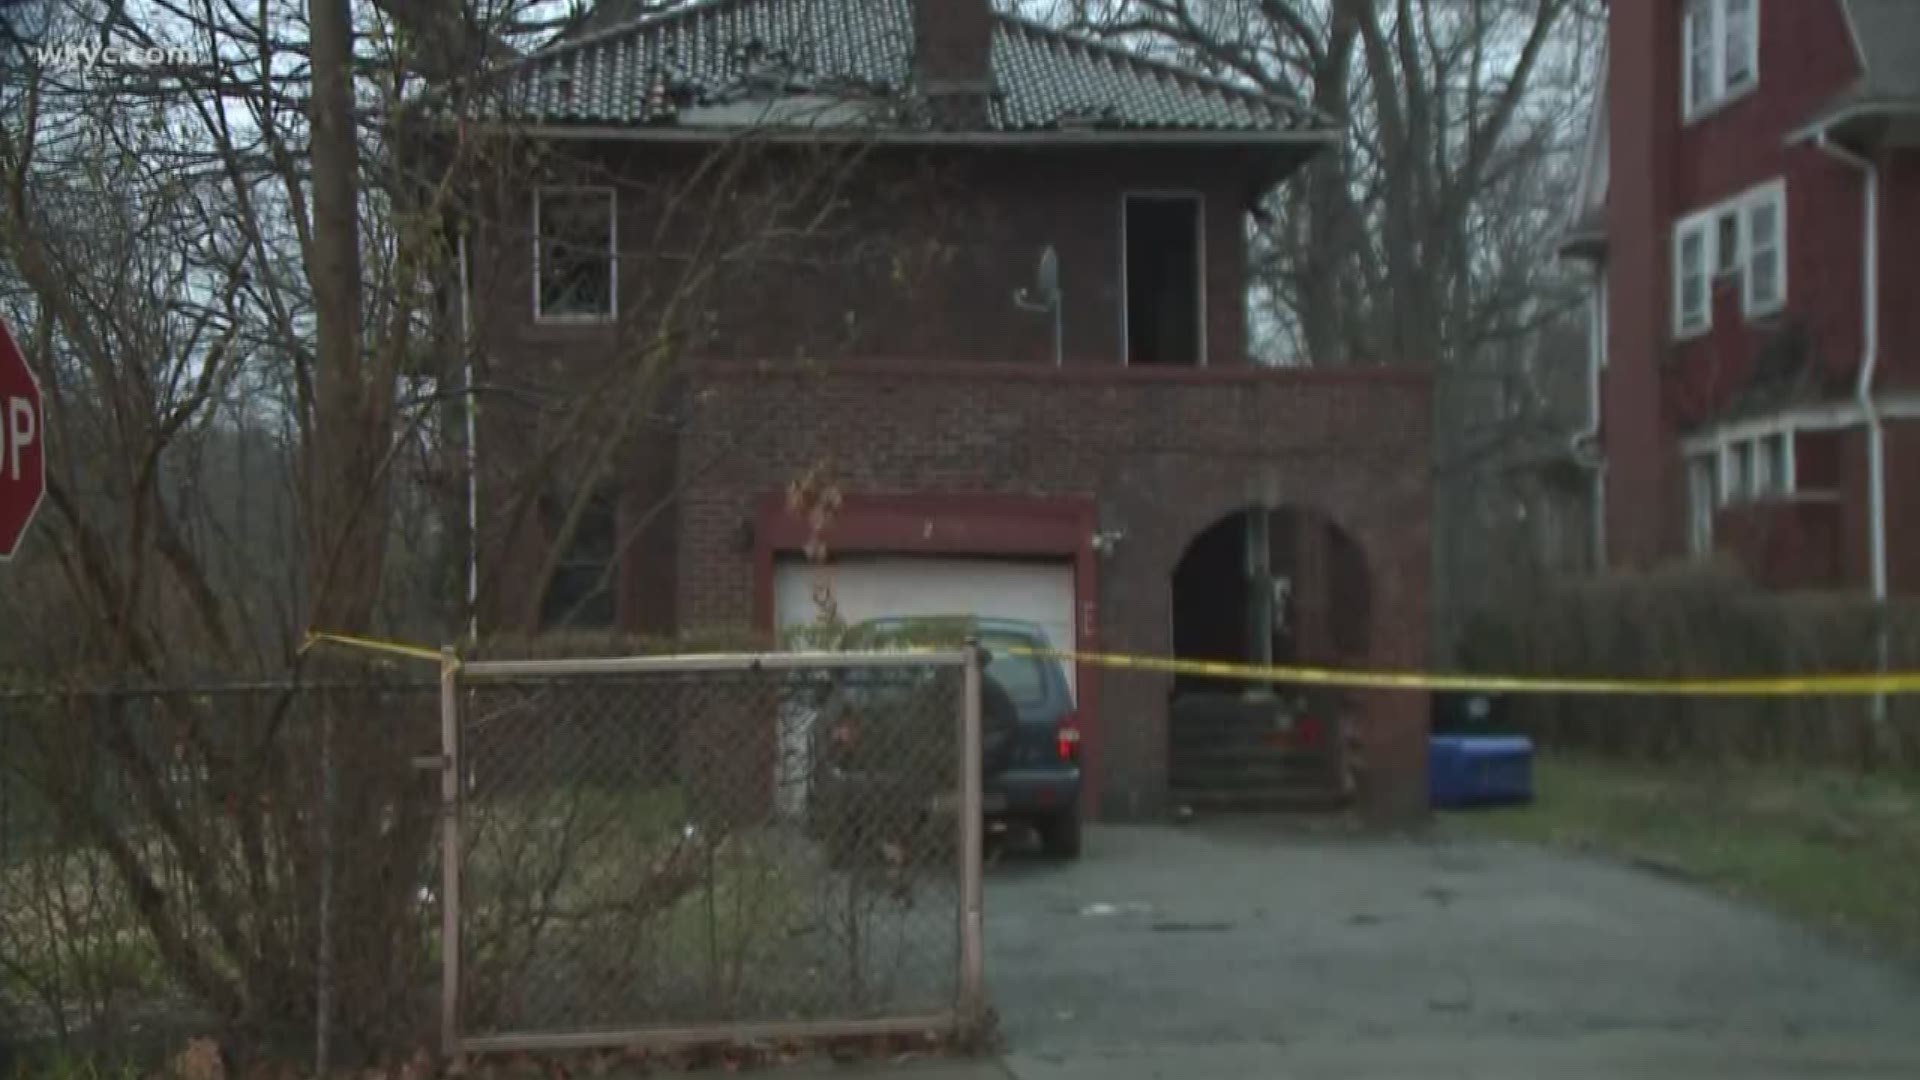 April 14, 2019: Three people were killed in an early morning fire that ripped through a home in the 1200 block of East 99th Street.